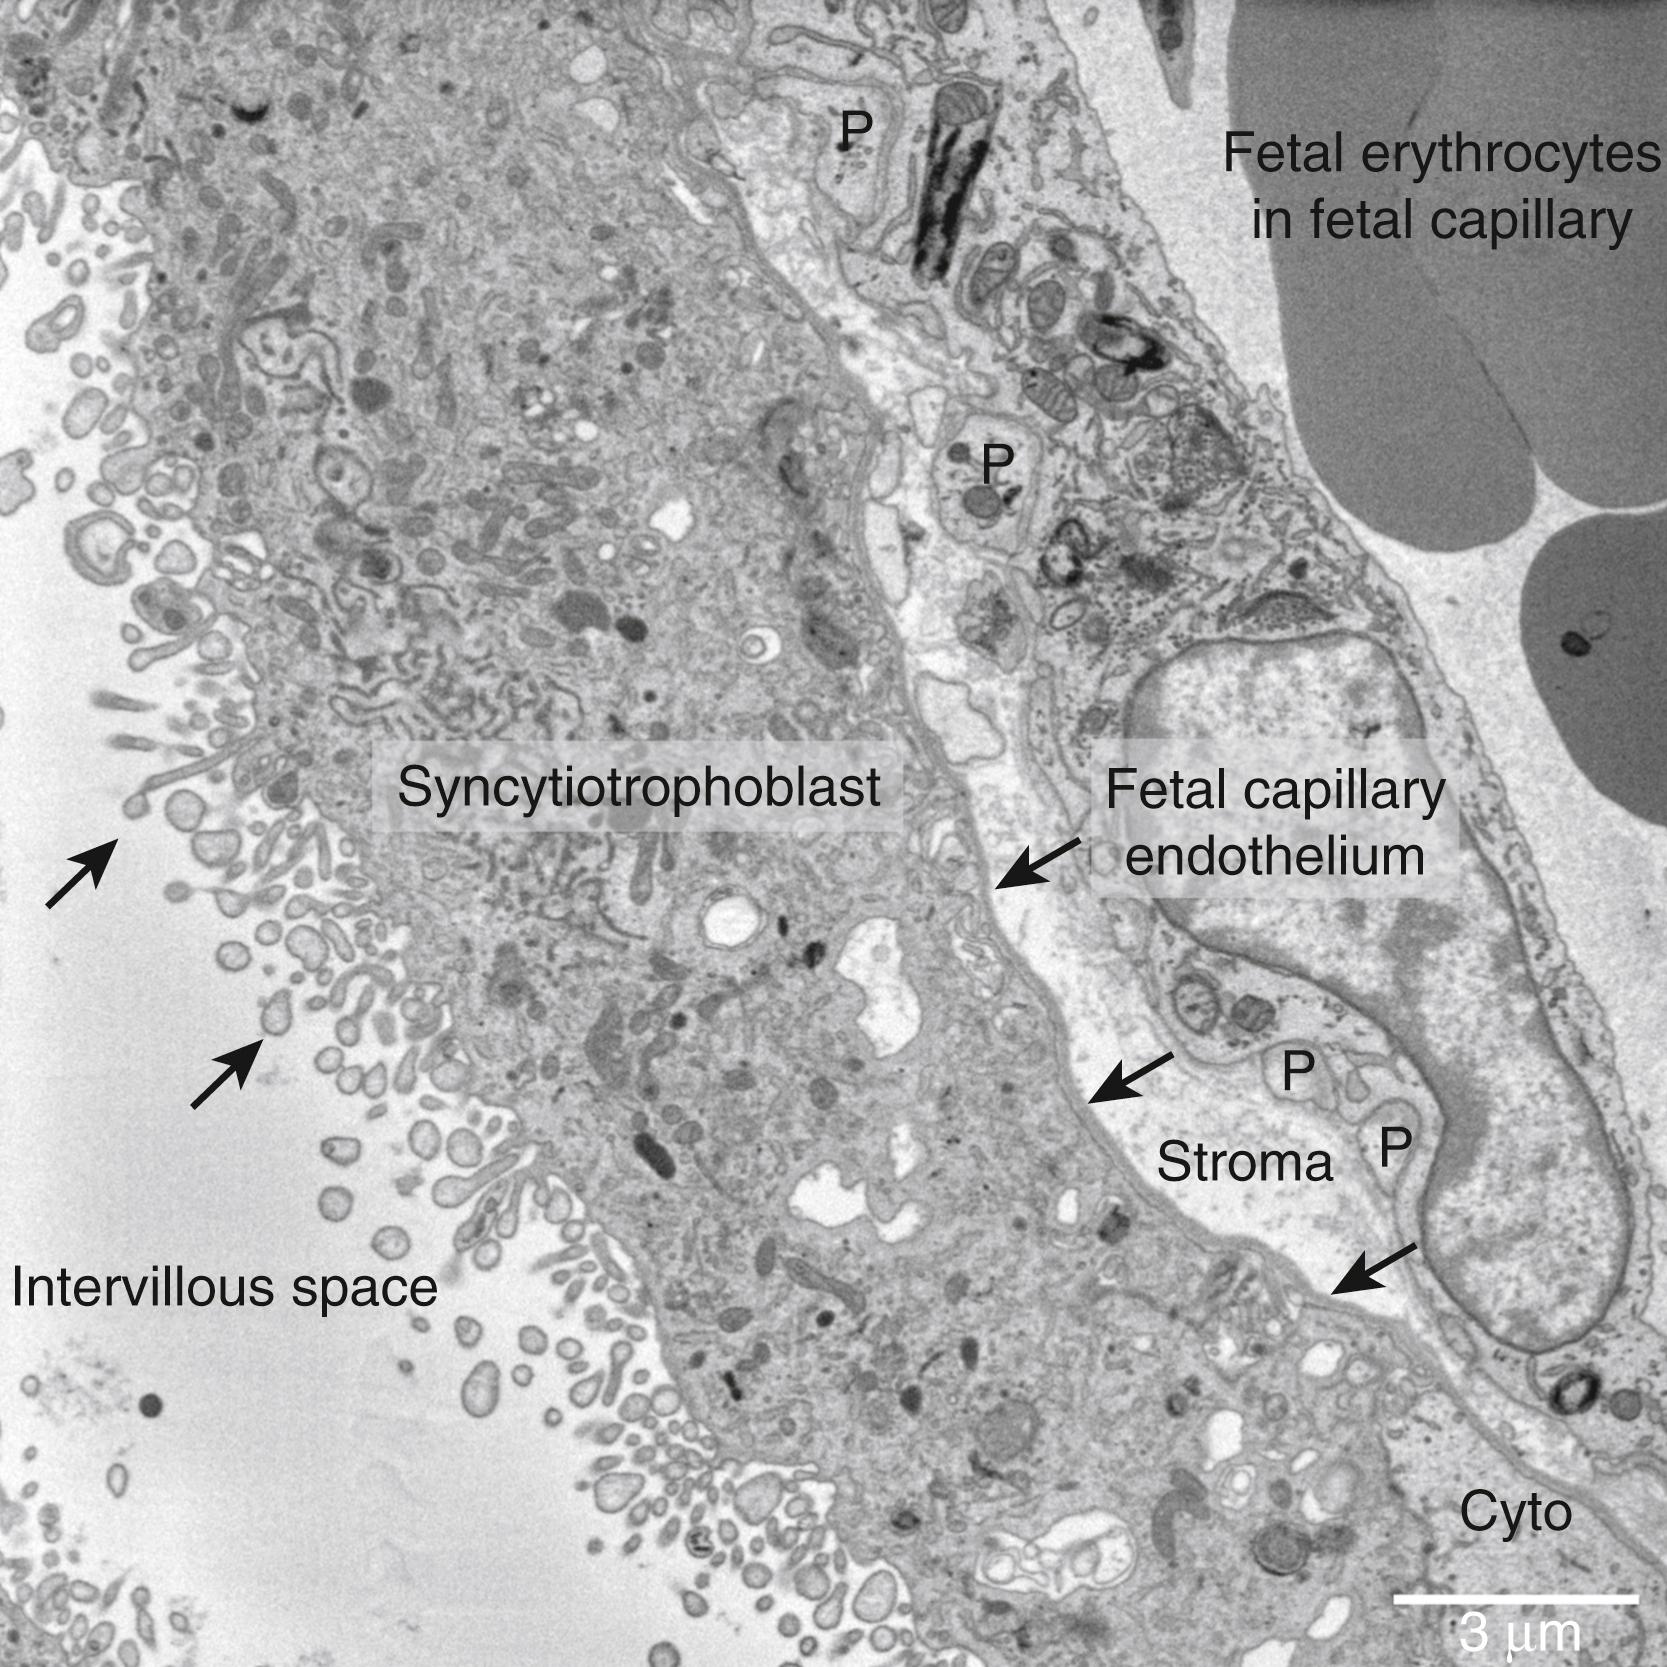 Fig. 10.1, Electron microscopy image showing a cross-section of the human placental barrier at term. The intervillous space is filled with maternal blood, the syncytiotrophoblast forms a continuous barrier across the surface of the villi, the micro villi on the apical plasma membrane are indicated by white arrows , and the syncytiotrophoblast basal membrane can be seen abutting the trophoblast basal lamina, which is indicated by black arrows . A small region of cytotrophoblast can be seen labeled “cyto” between the syncytiotrophoblast and trophoblast basal lamina. The connective tissue of the villous stroma lies between the trophoblast and the fetal capillaries. The stoma also contains fibroblasts and macrophages, which are not shown here. Pericyte fingers around the fetal capillary are labeled “P.” The fetal capillary endothelial cells form the fetal blood vessel.